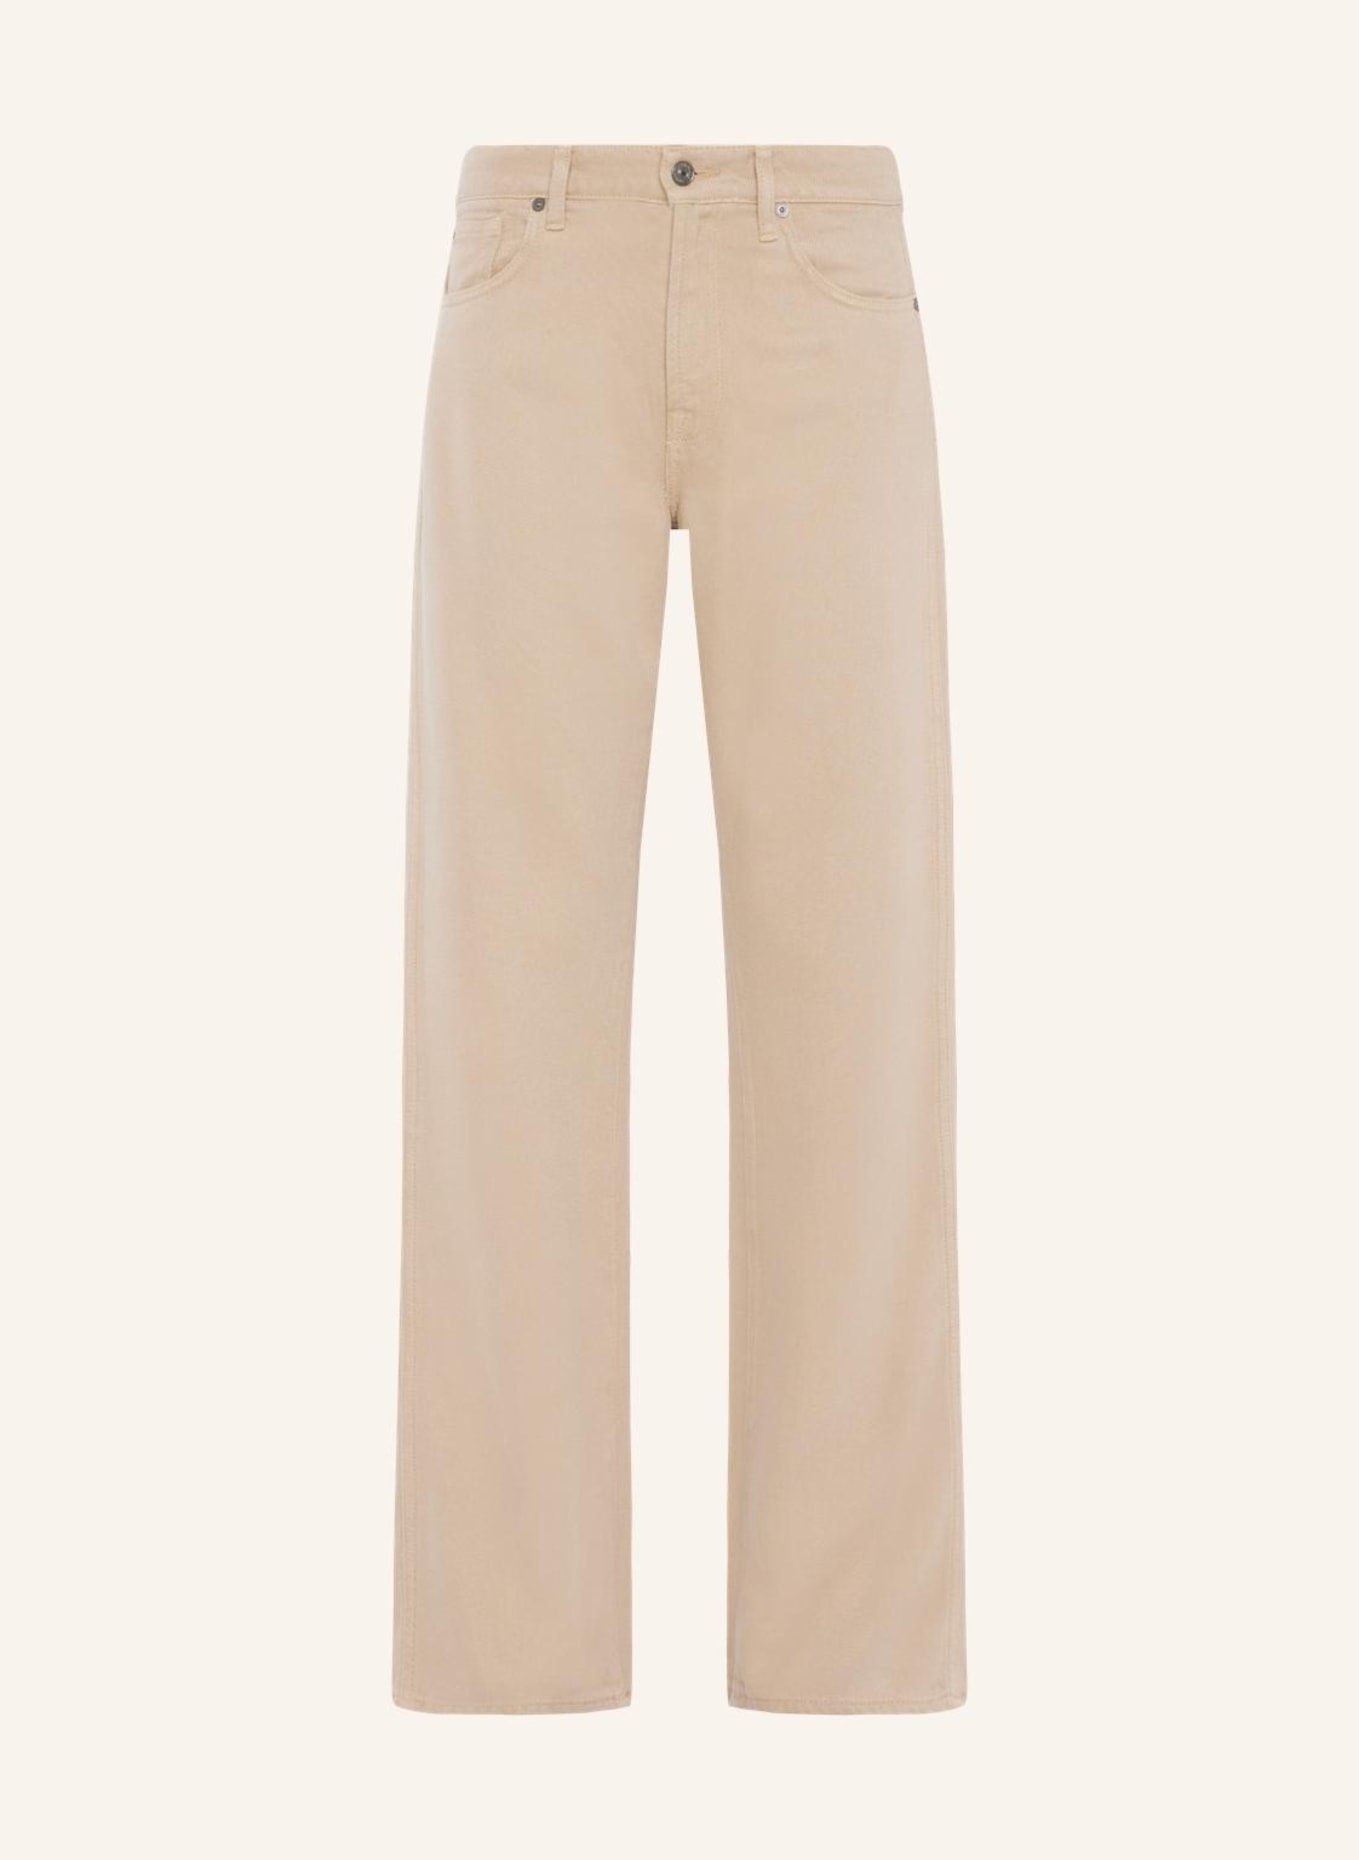 7 for all mankind Pant TESS TROUSER Straight fit, Farbe: BEIGE (Bild 1)